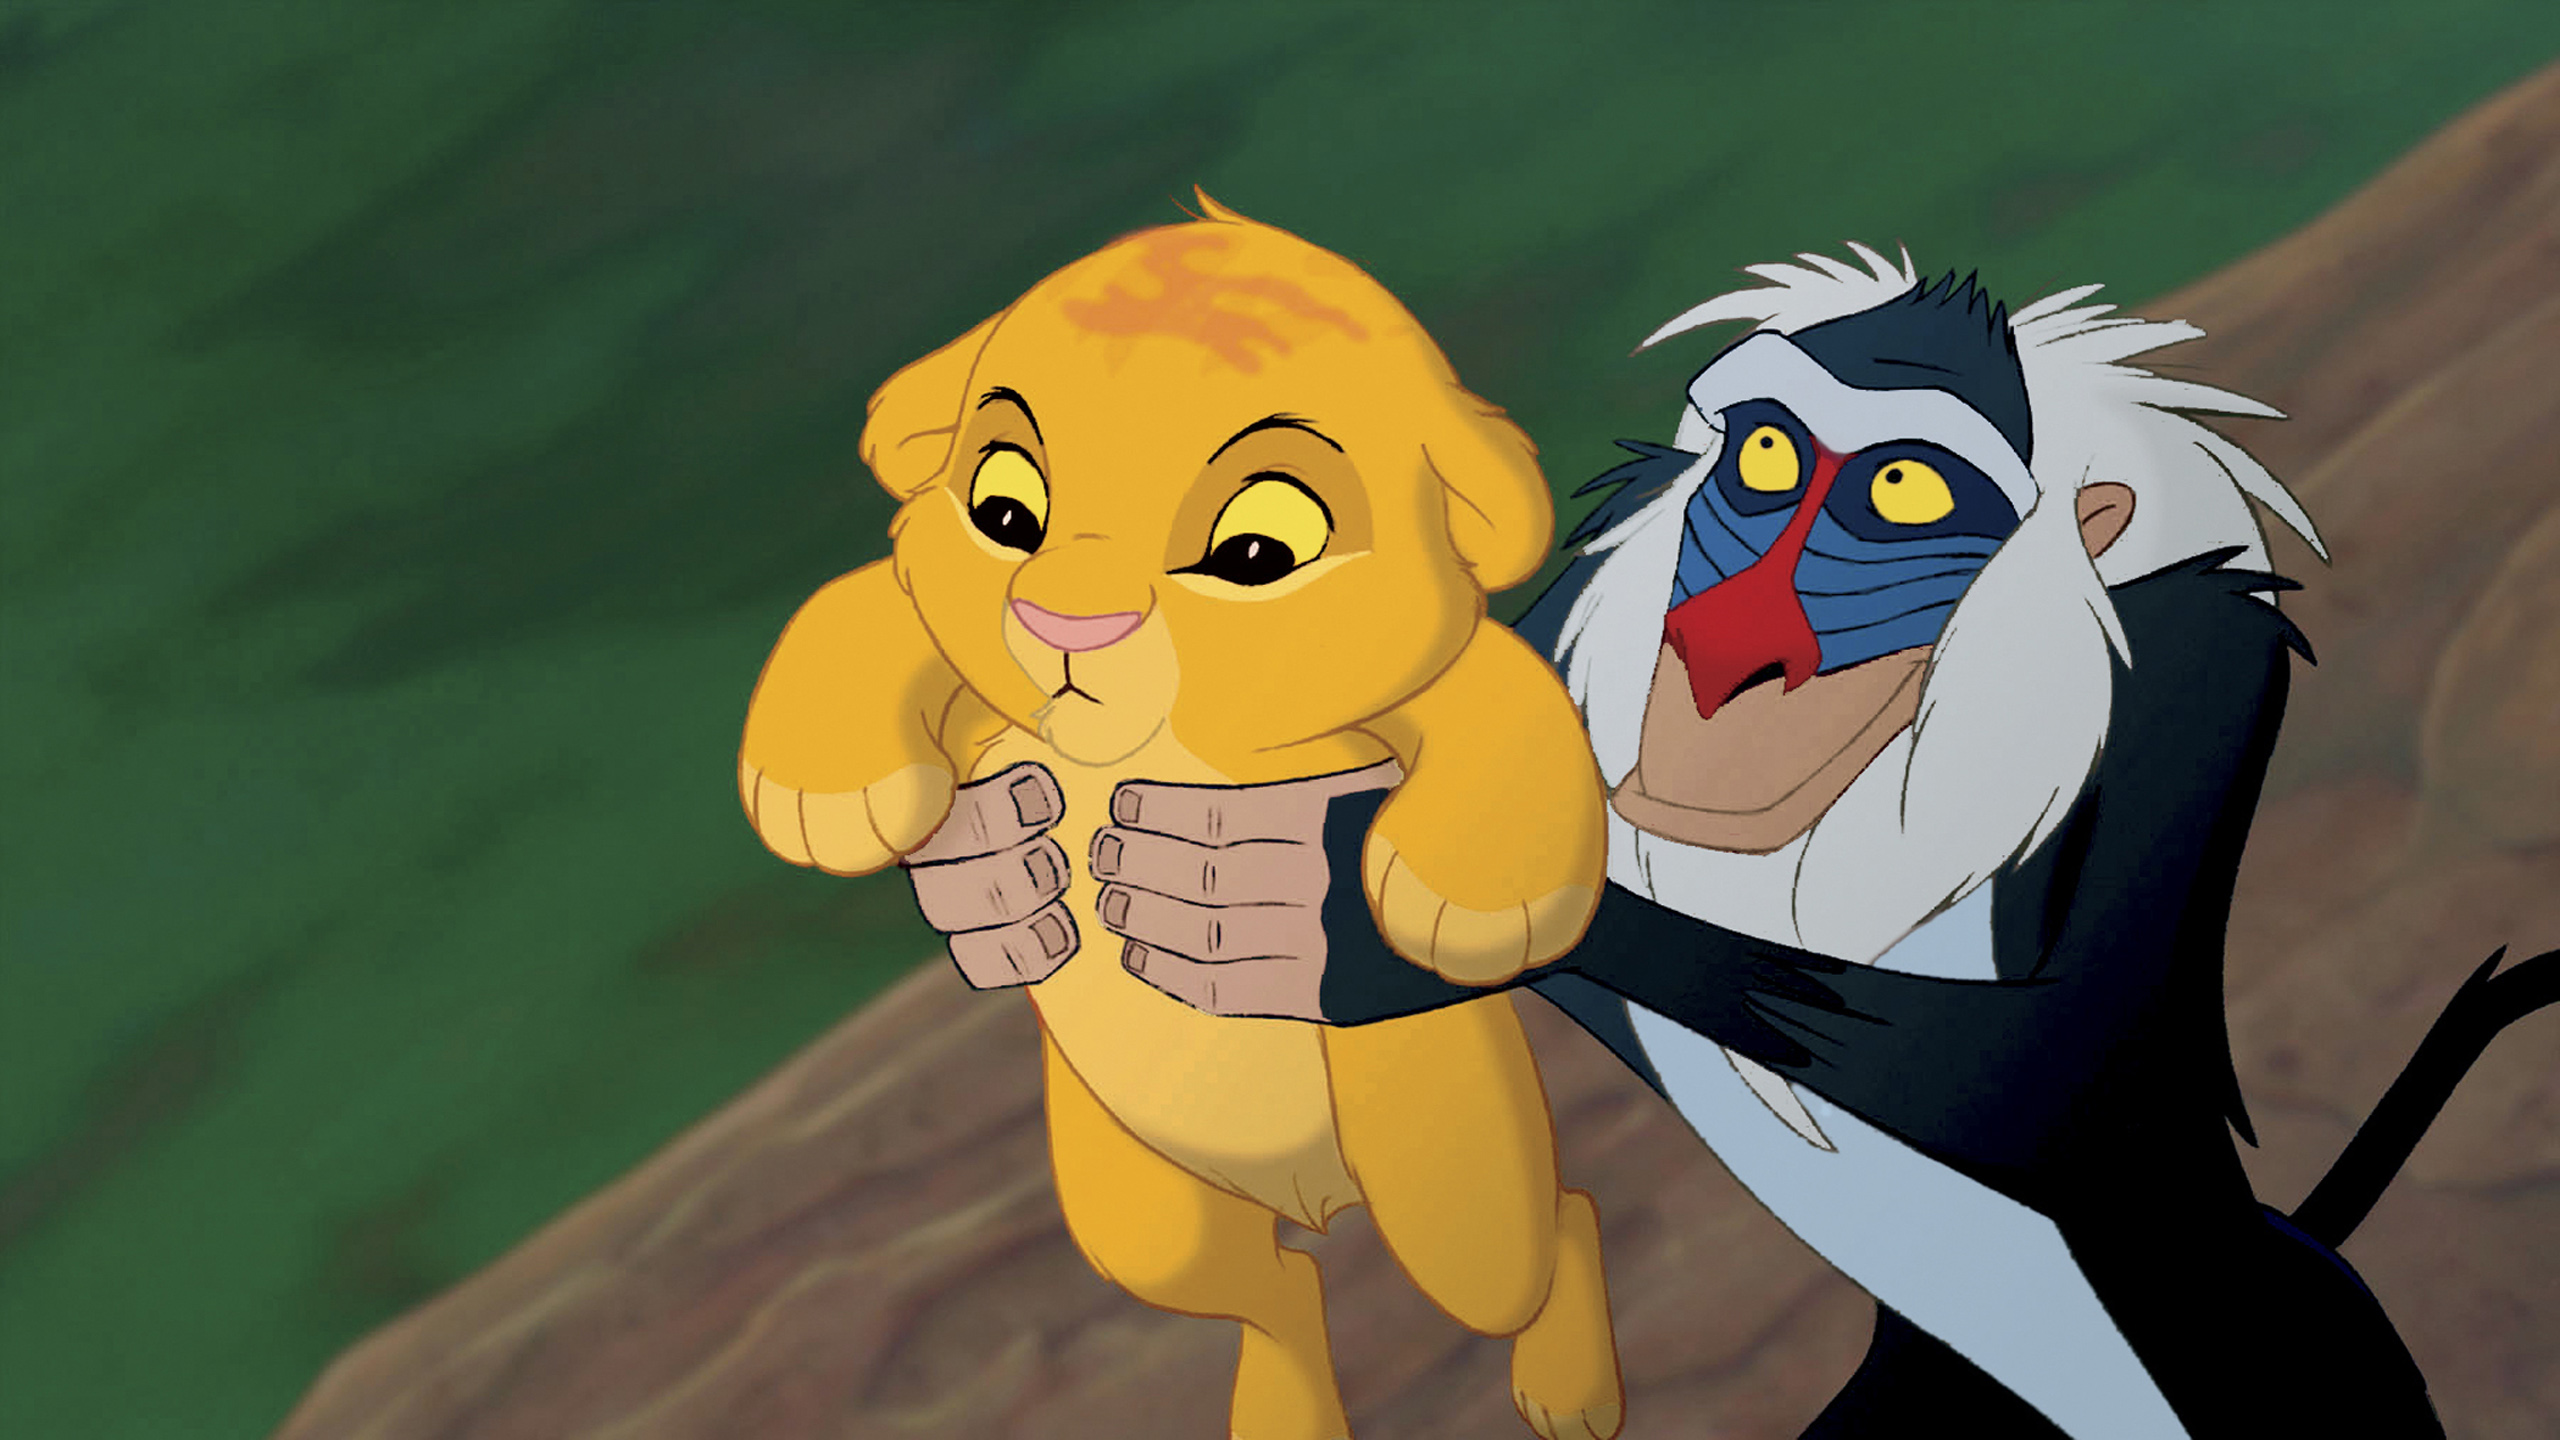 the lion king images free download